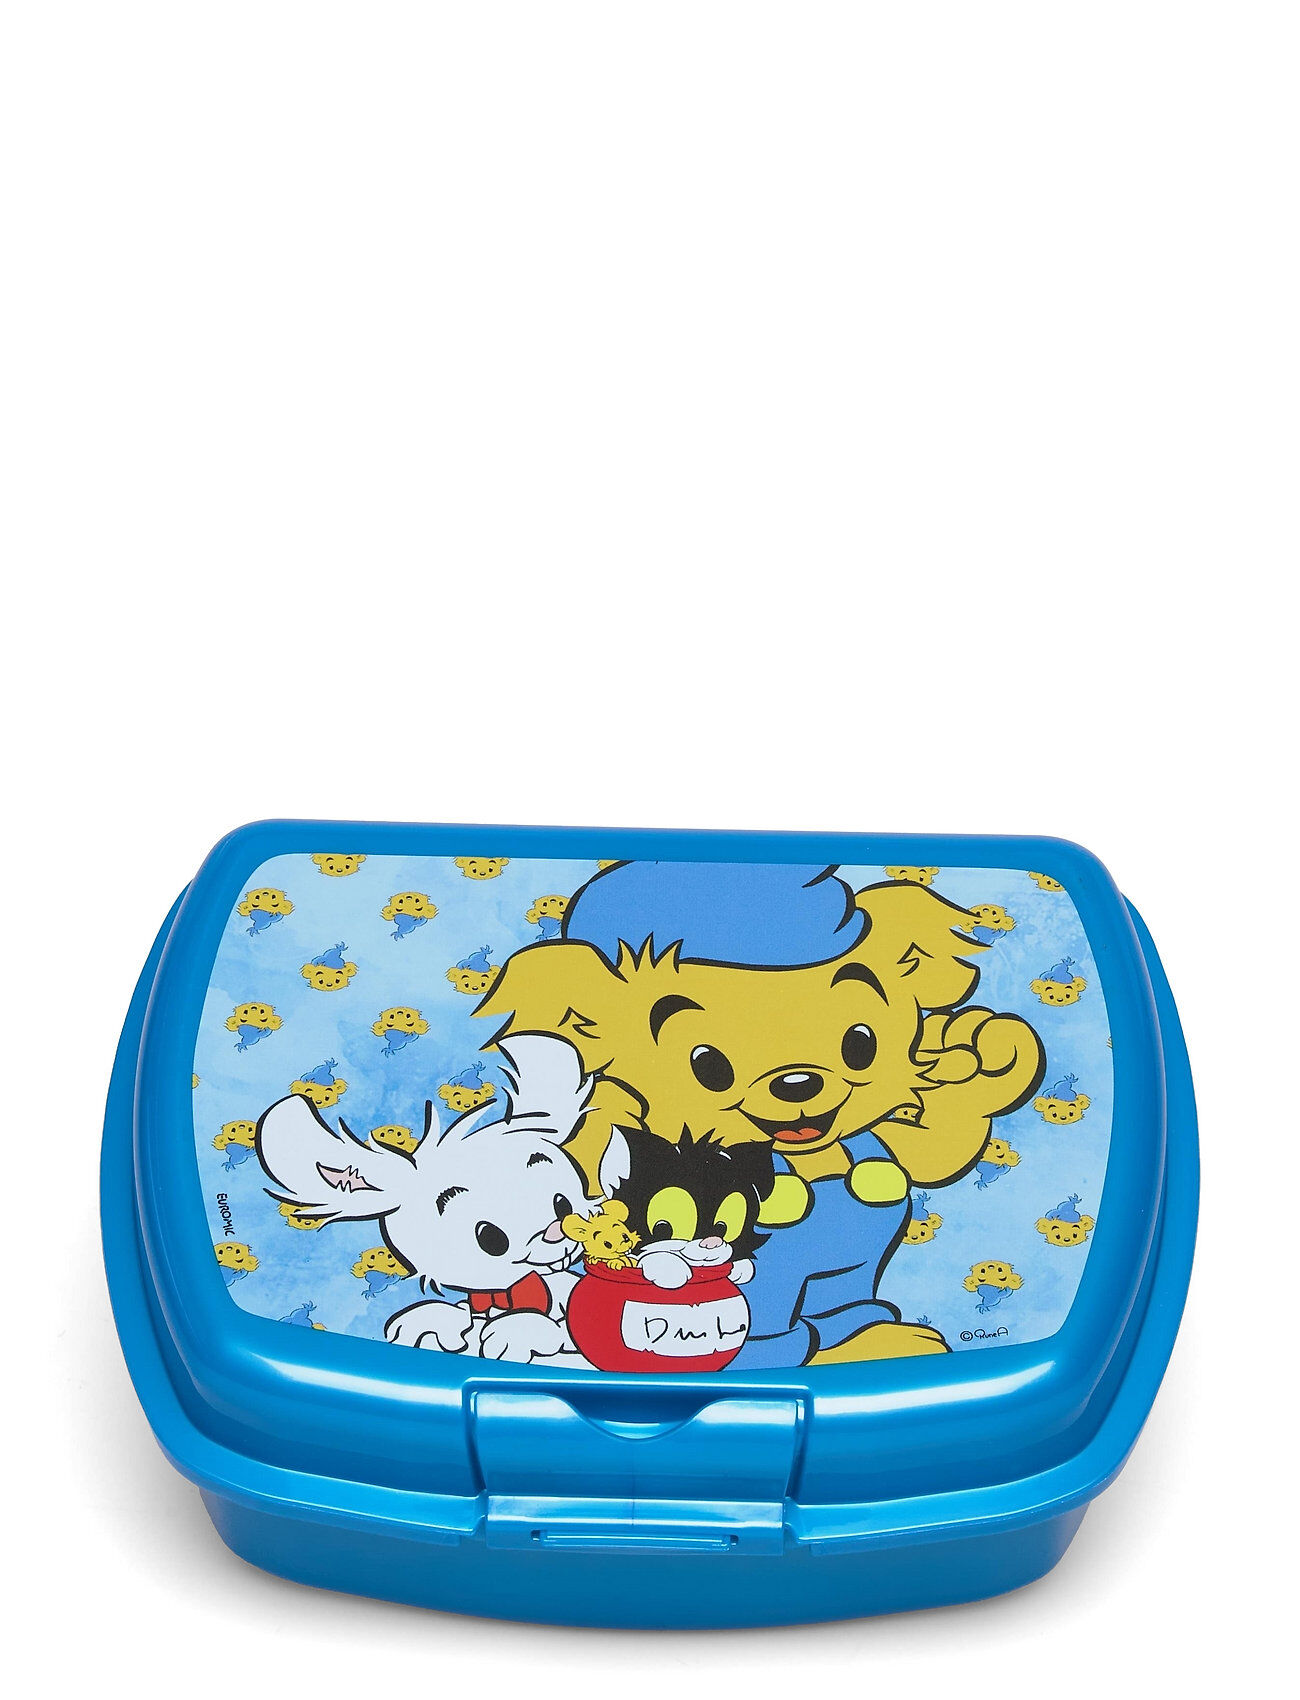 Euromic Bamse Happy Friends Urban Sandwich Box Home Meal Time Lunch Boxes Blå Euromic